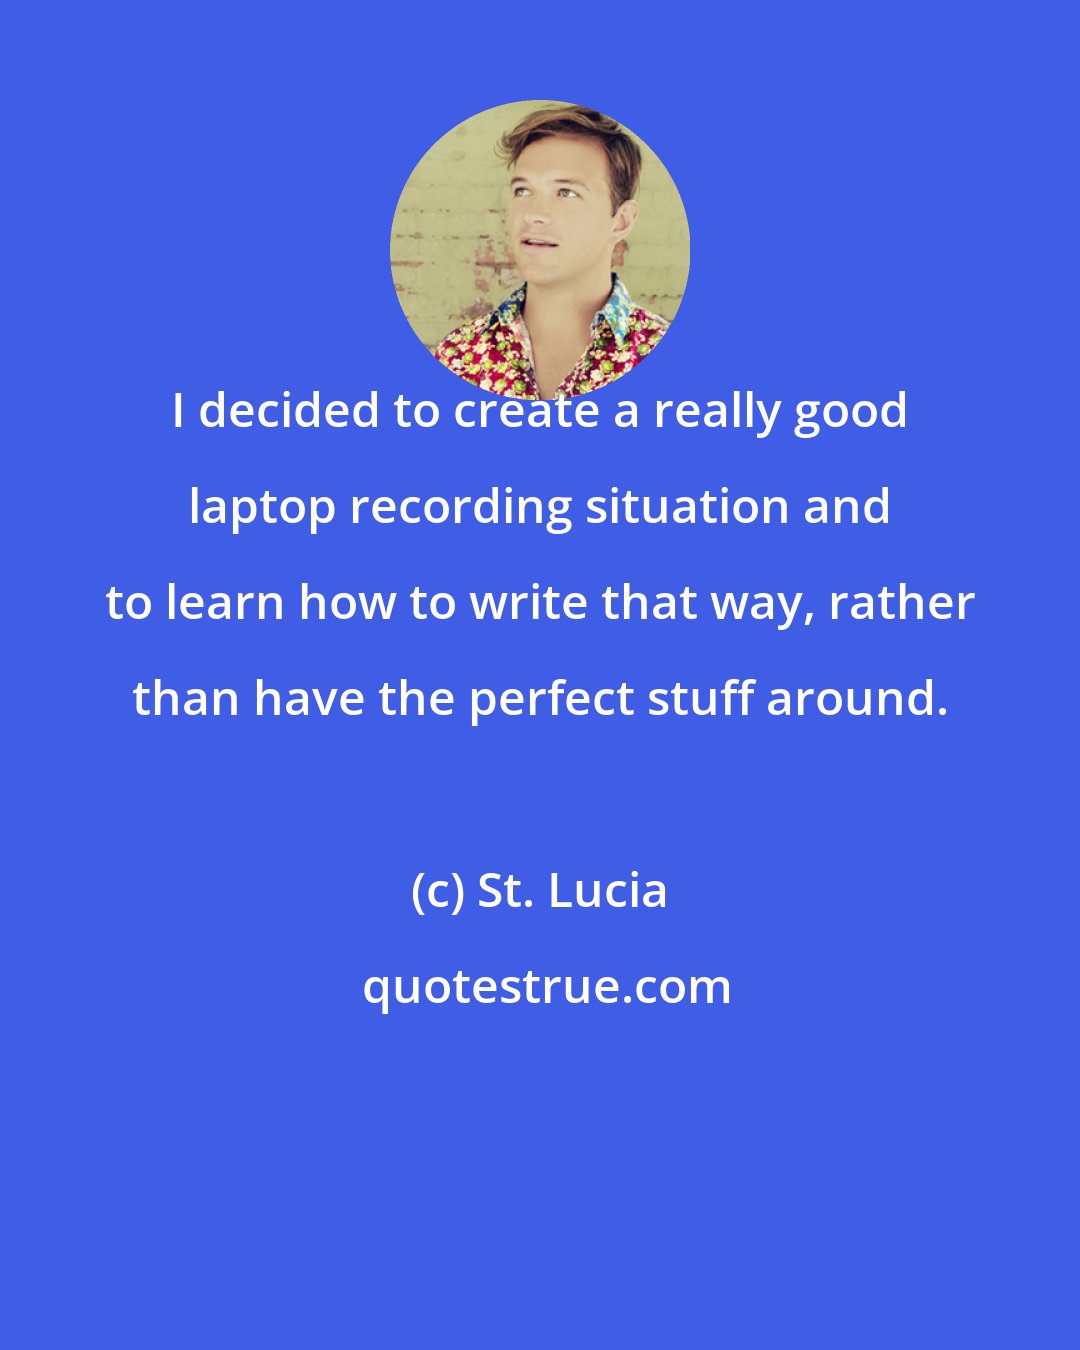 St. Lucia: I decided to create a really good laptop recording situation and to learn how to write that way, rather than have the perfect stuff around.